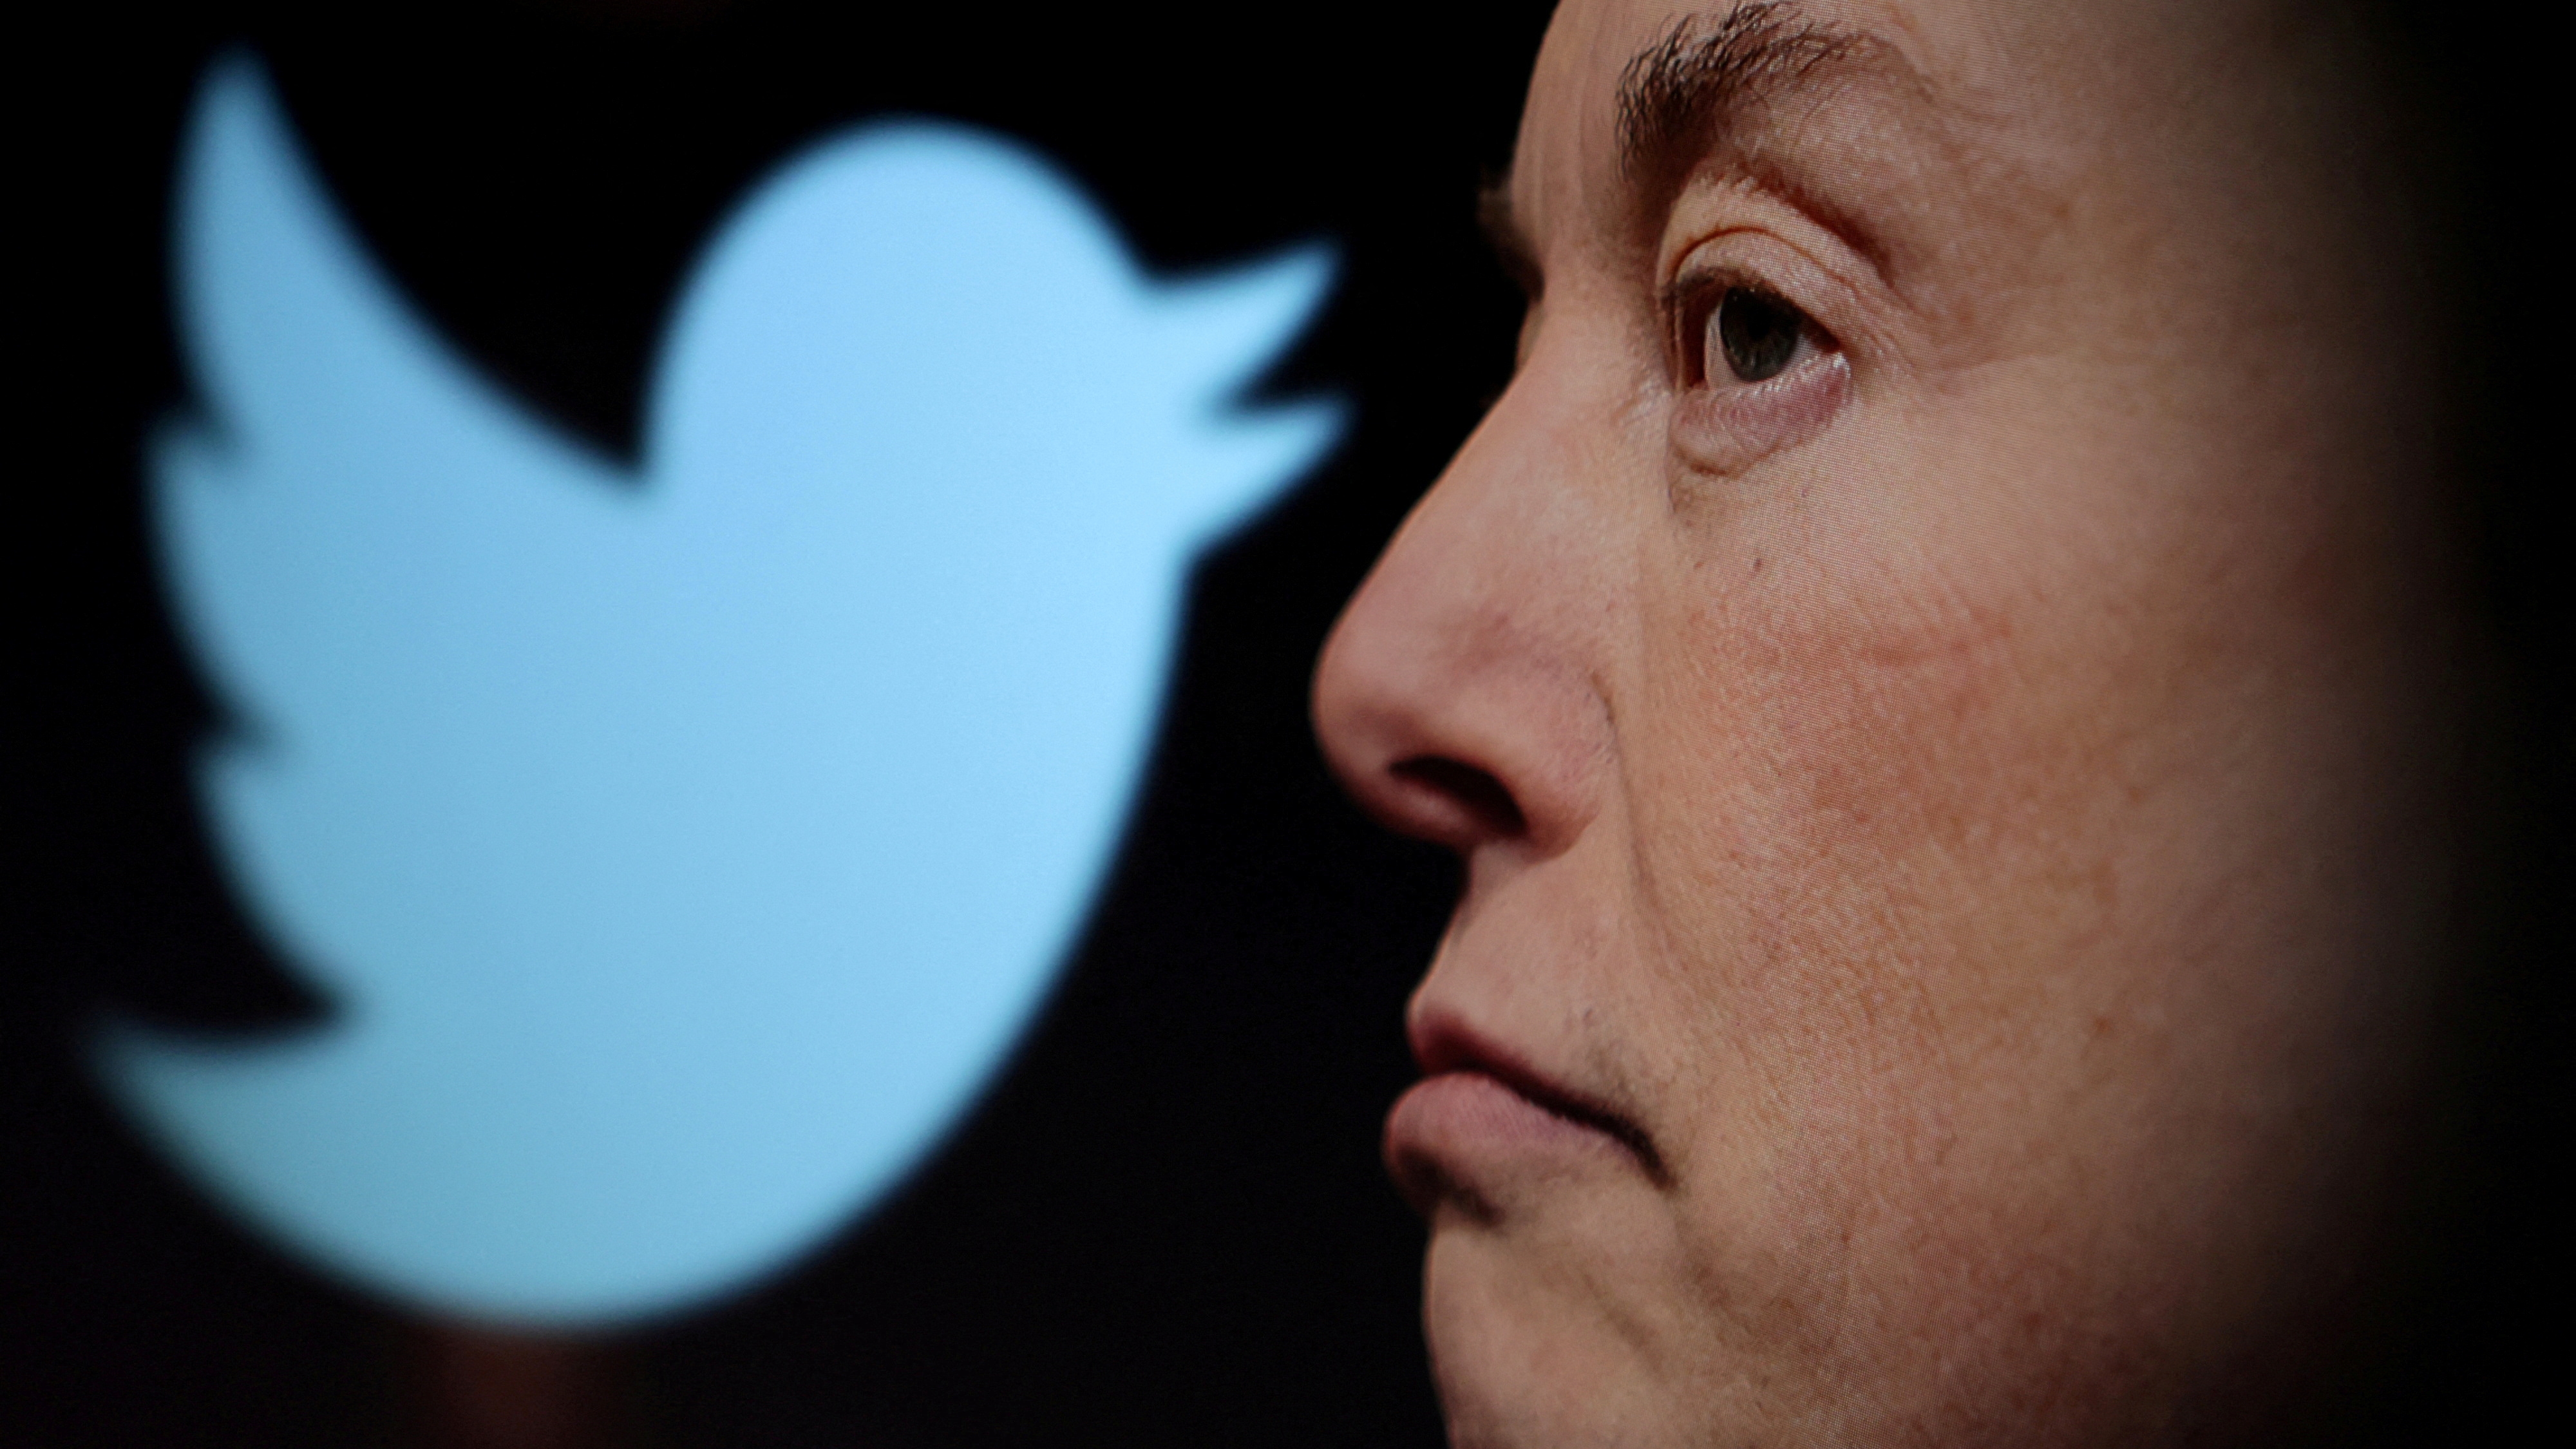 Twitter Inc. was sued over Elon Musk's plan to cut around 3,700 jobs on the social media platform (REUTERS/Dado Ruvic/Illustration)